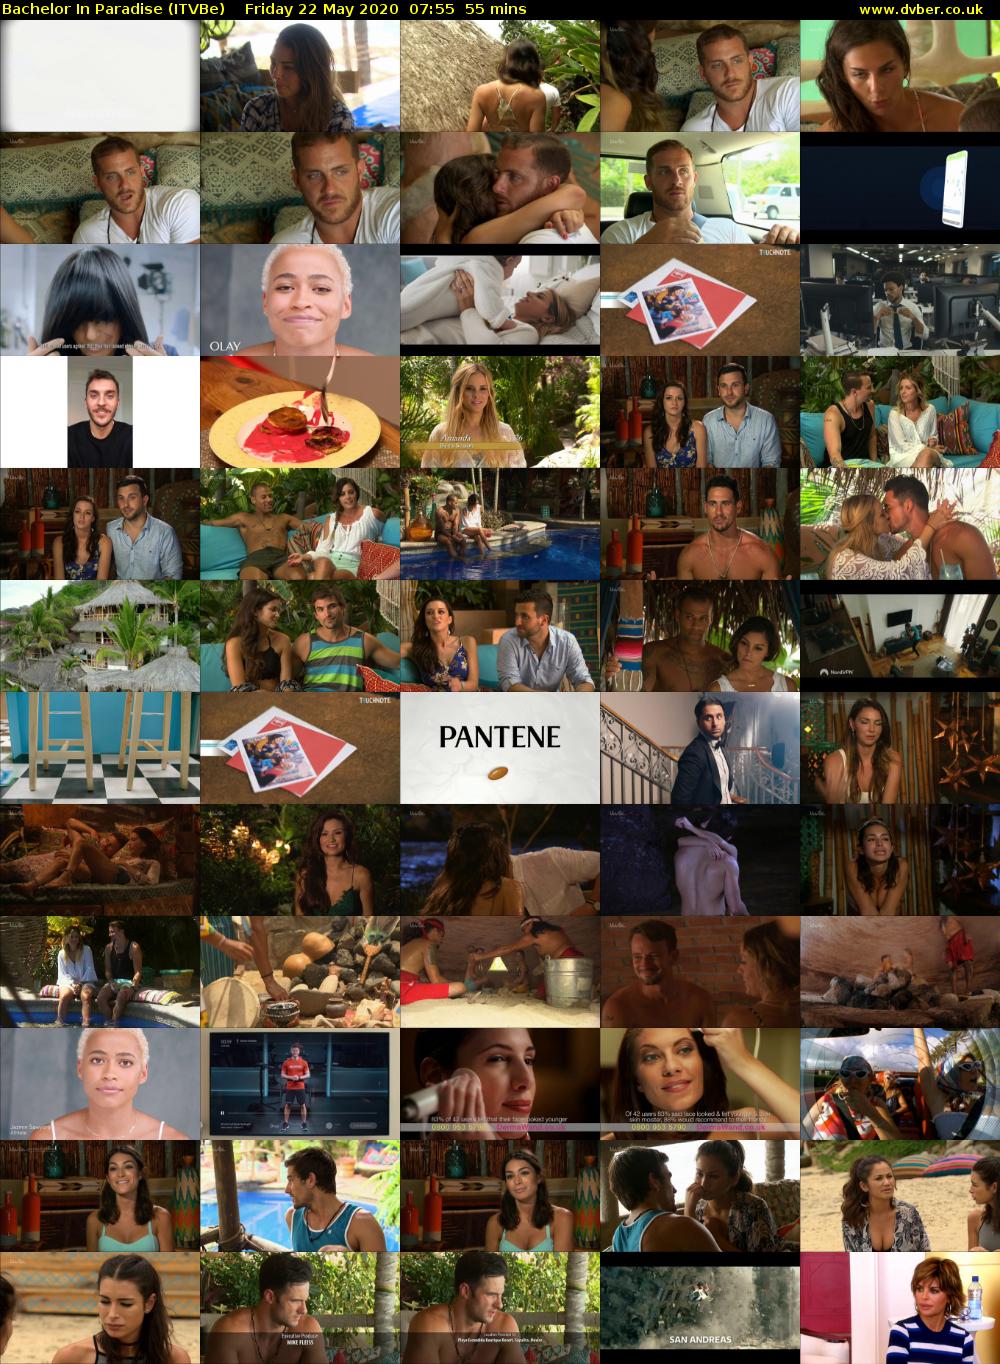 Bachelor in Paradise (ITVBe) Friday 22 May 2020 07:55 - 08:50